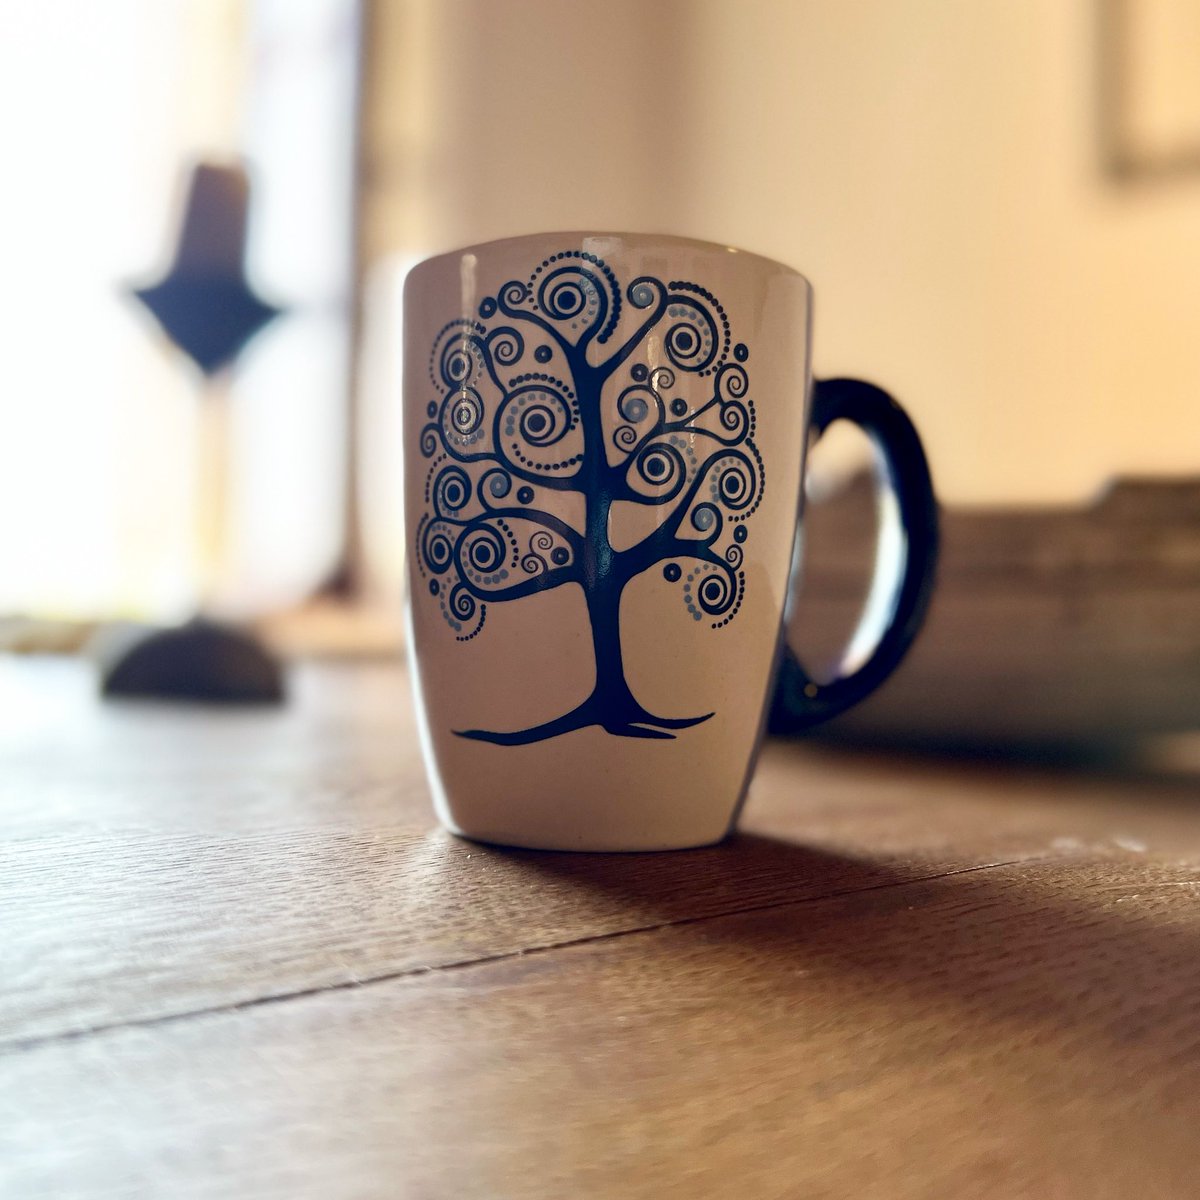 Ancient Tree of Life Mug ⚡️

A beautiful and unique mug decoration for multiple uses and of excellent material.

Shop Now in Our Website Here
 ⬇️⬇️⬇️
zeusgreekcollection.com

#zeusgreekcollection #zeusgreek #zeus #zgk #mykonos #greek
#athens #jewerlystore #vintagejewelly #sales